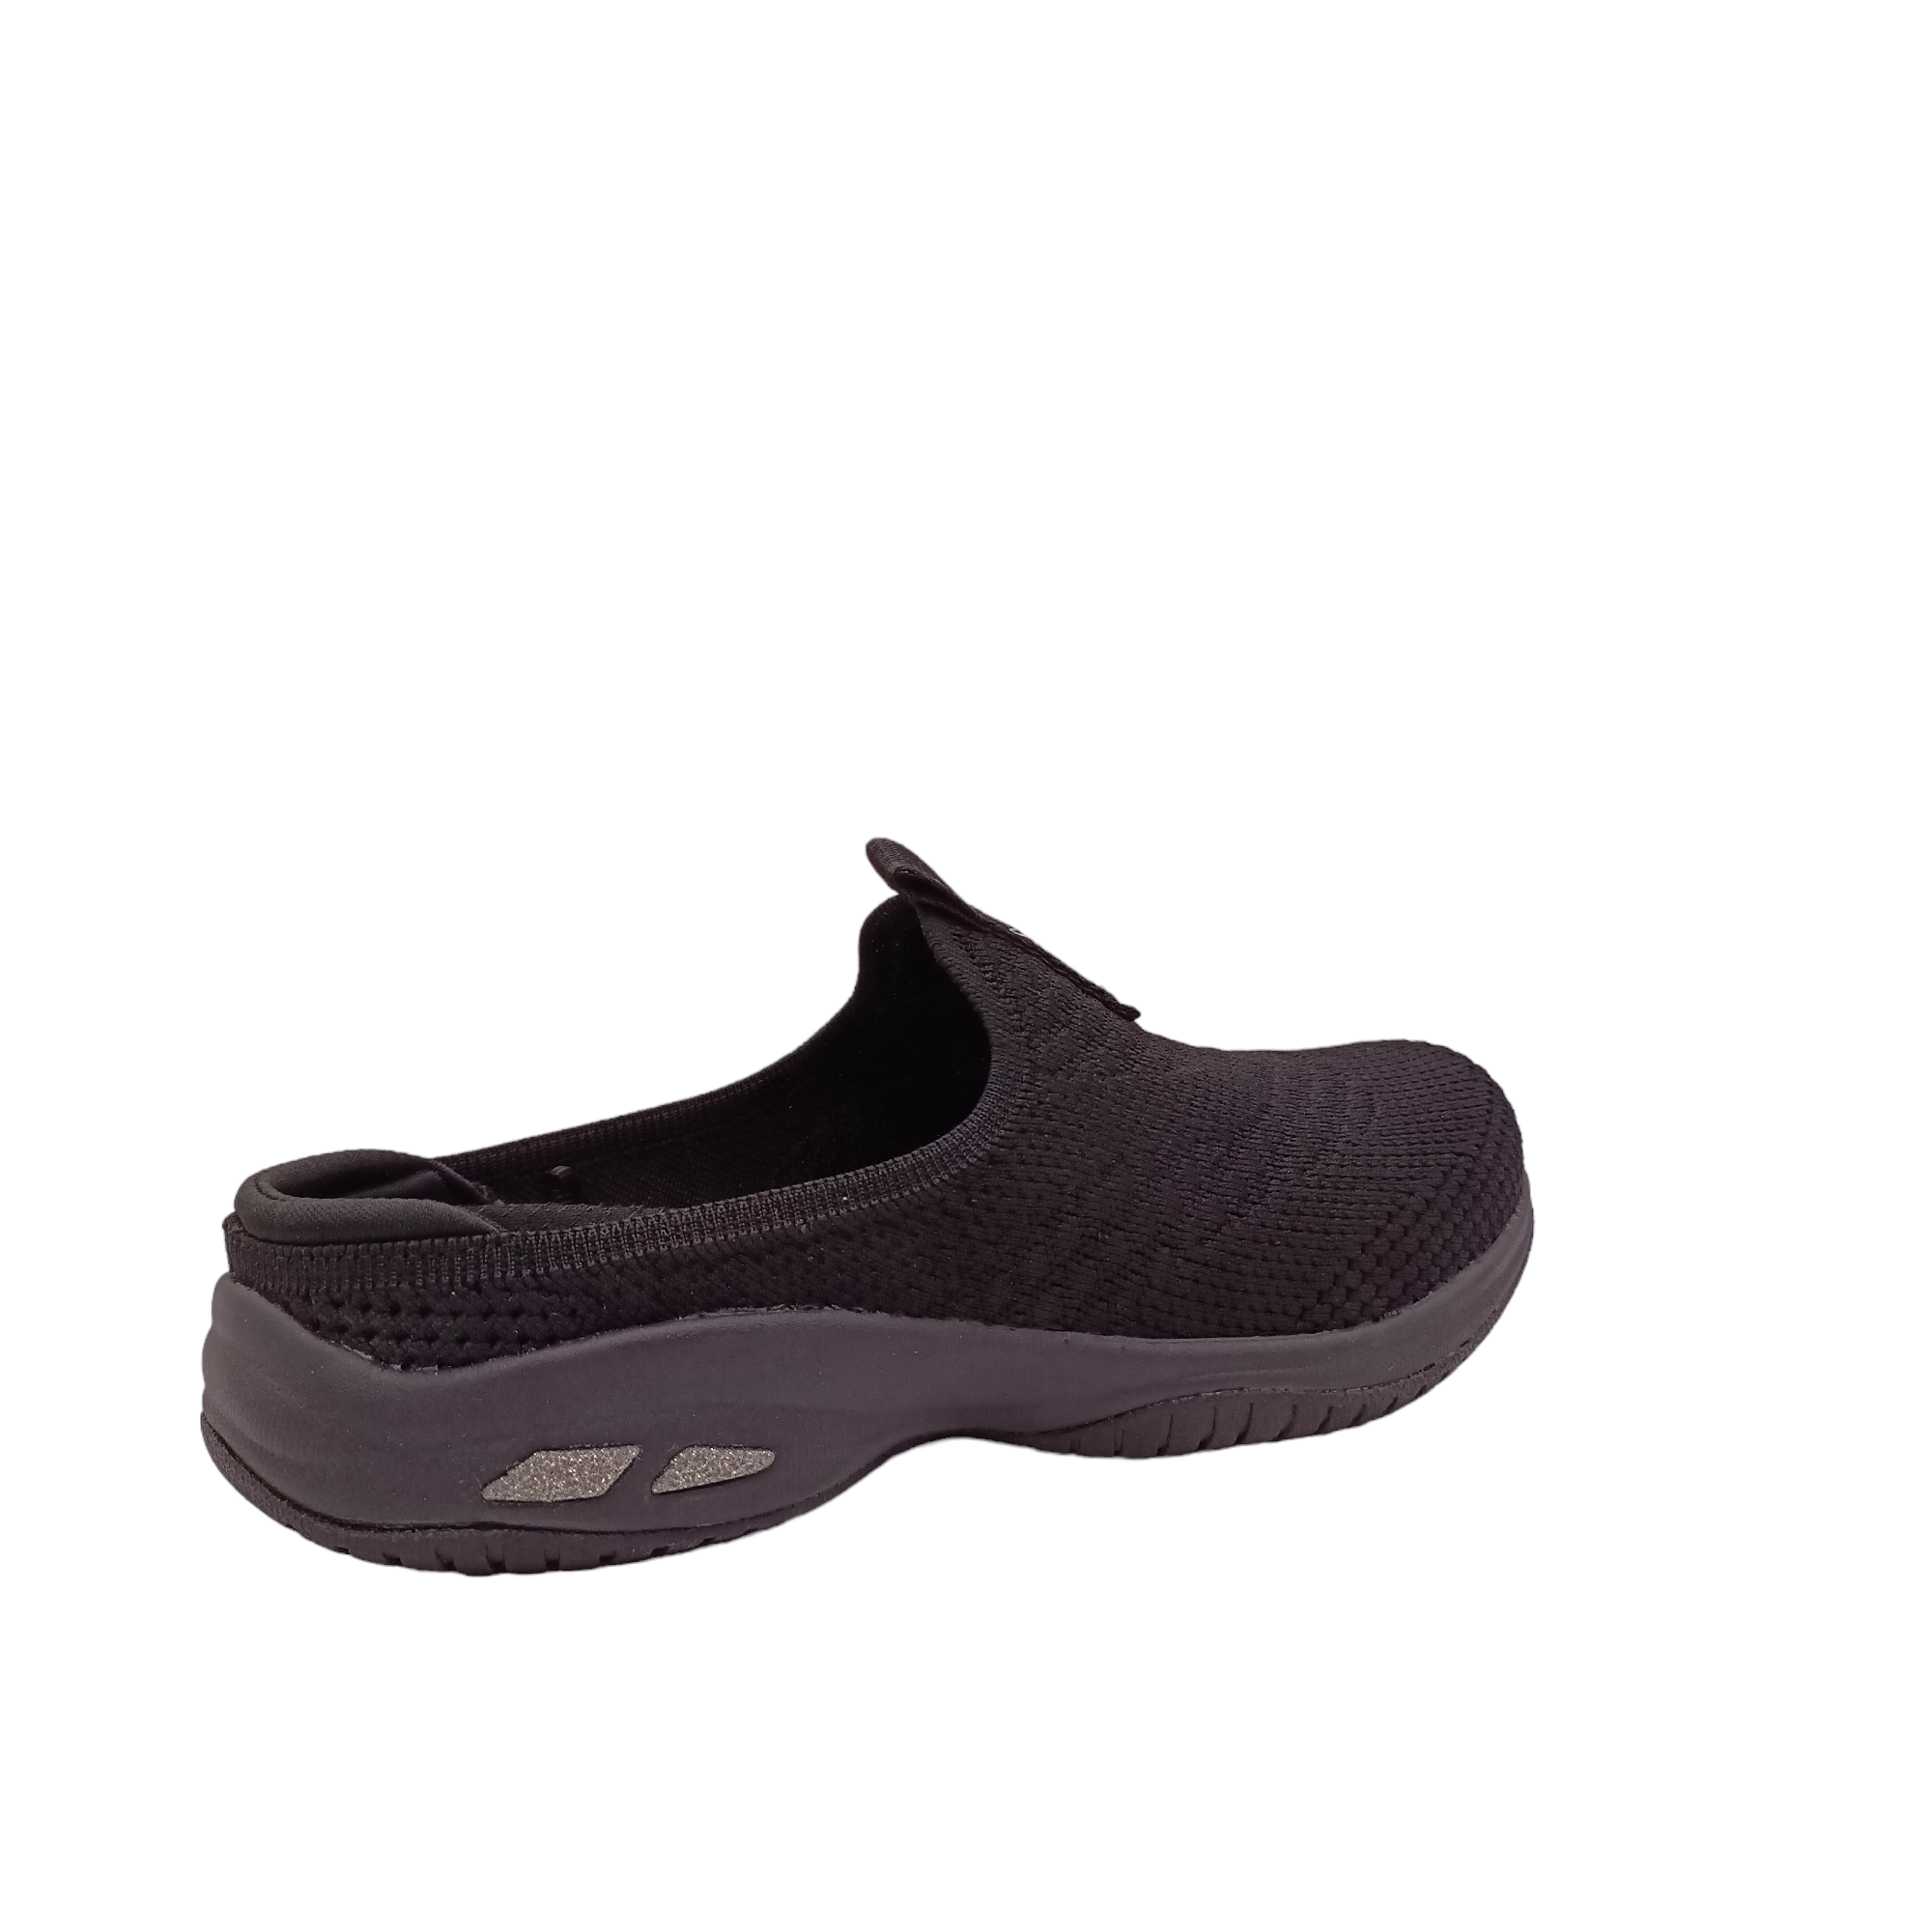 Shop Snuggle Vibes Skechers - with shoe&amp;me - from Skechers - Mules - Slide/Scuff, Winter, Womens - [collection]